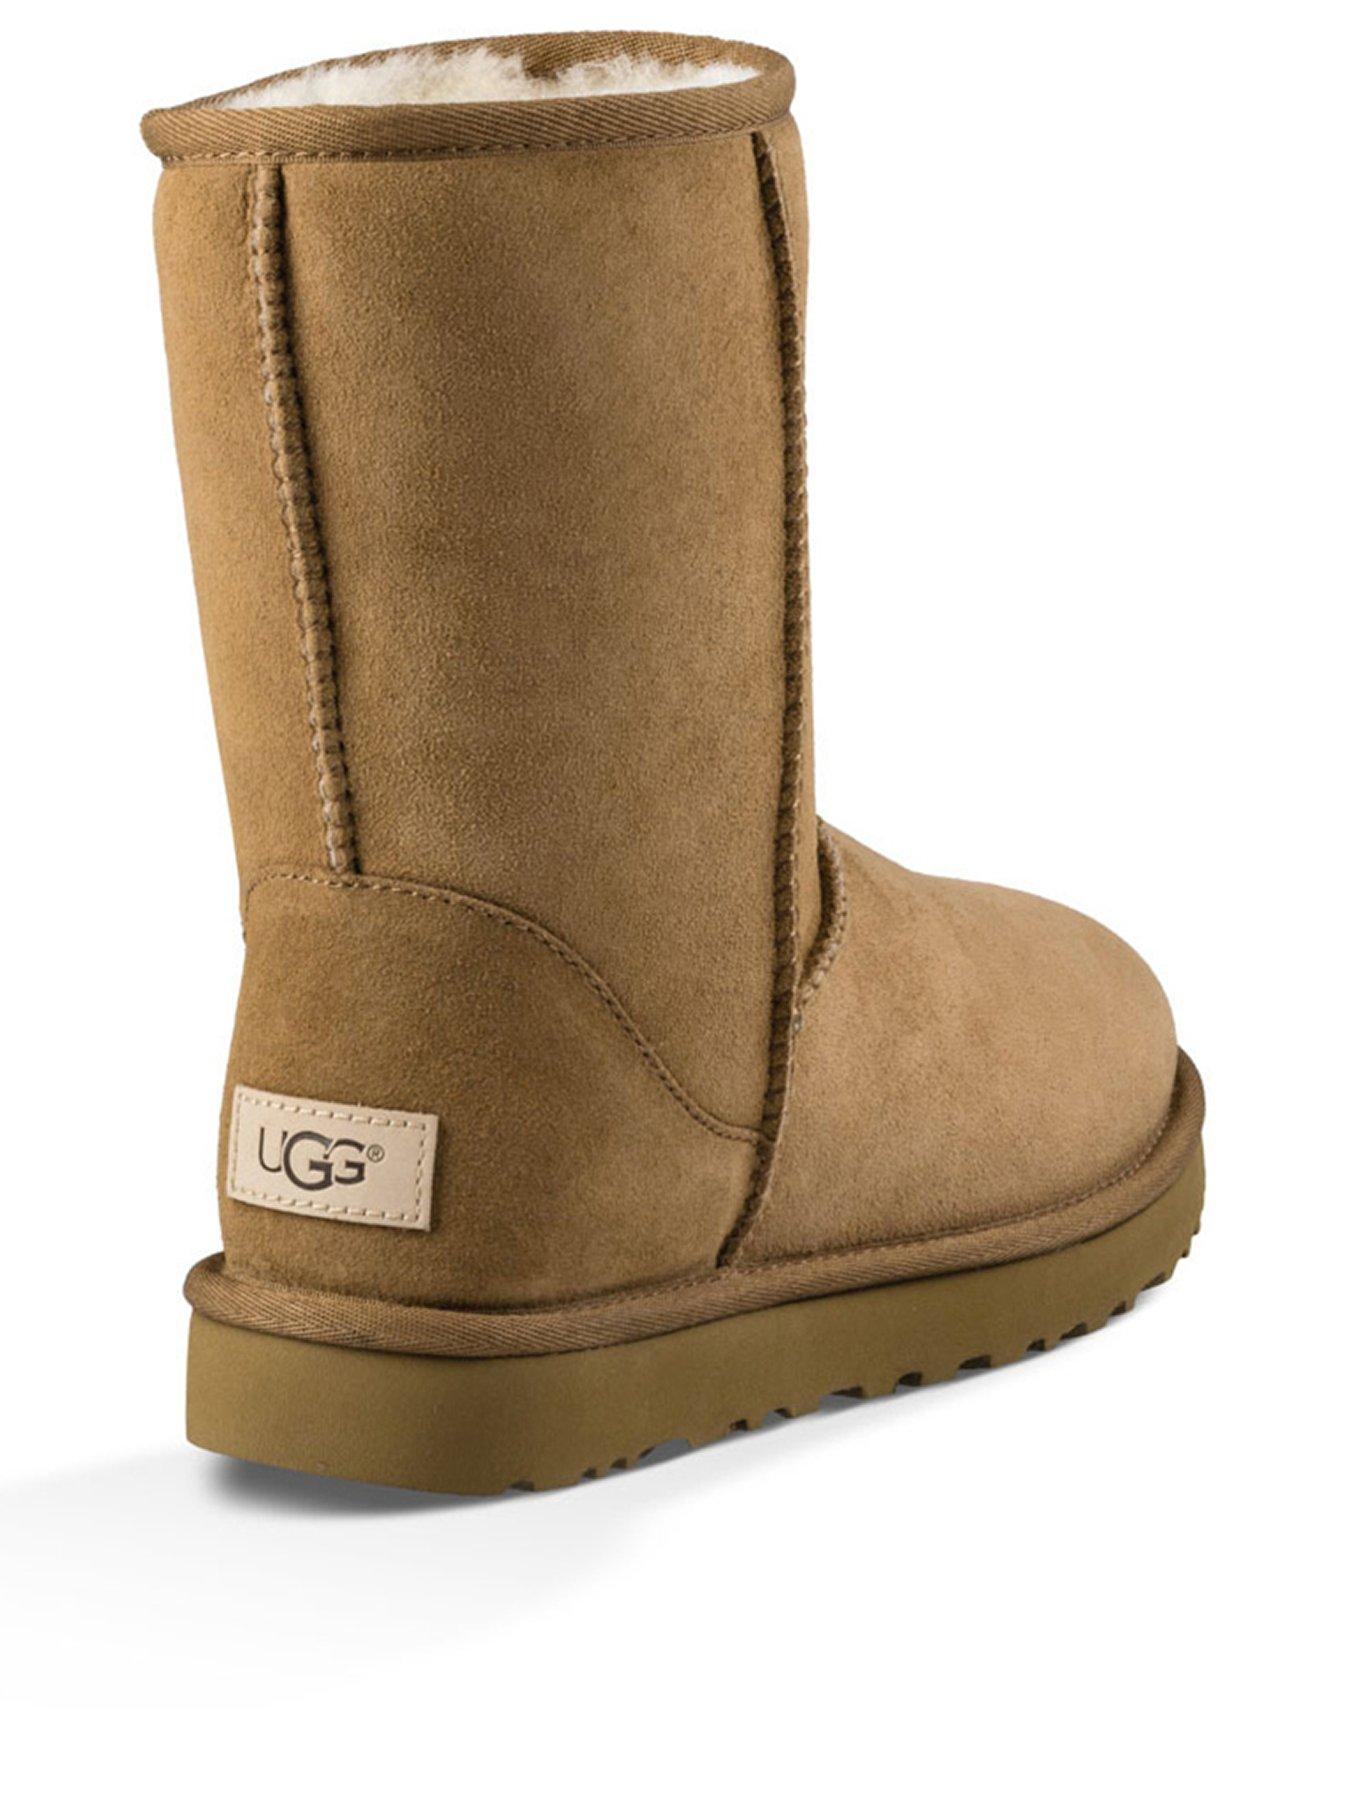 ugg classic short brown